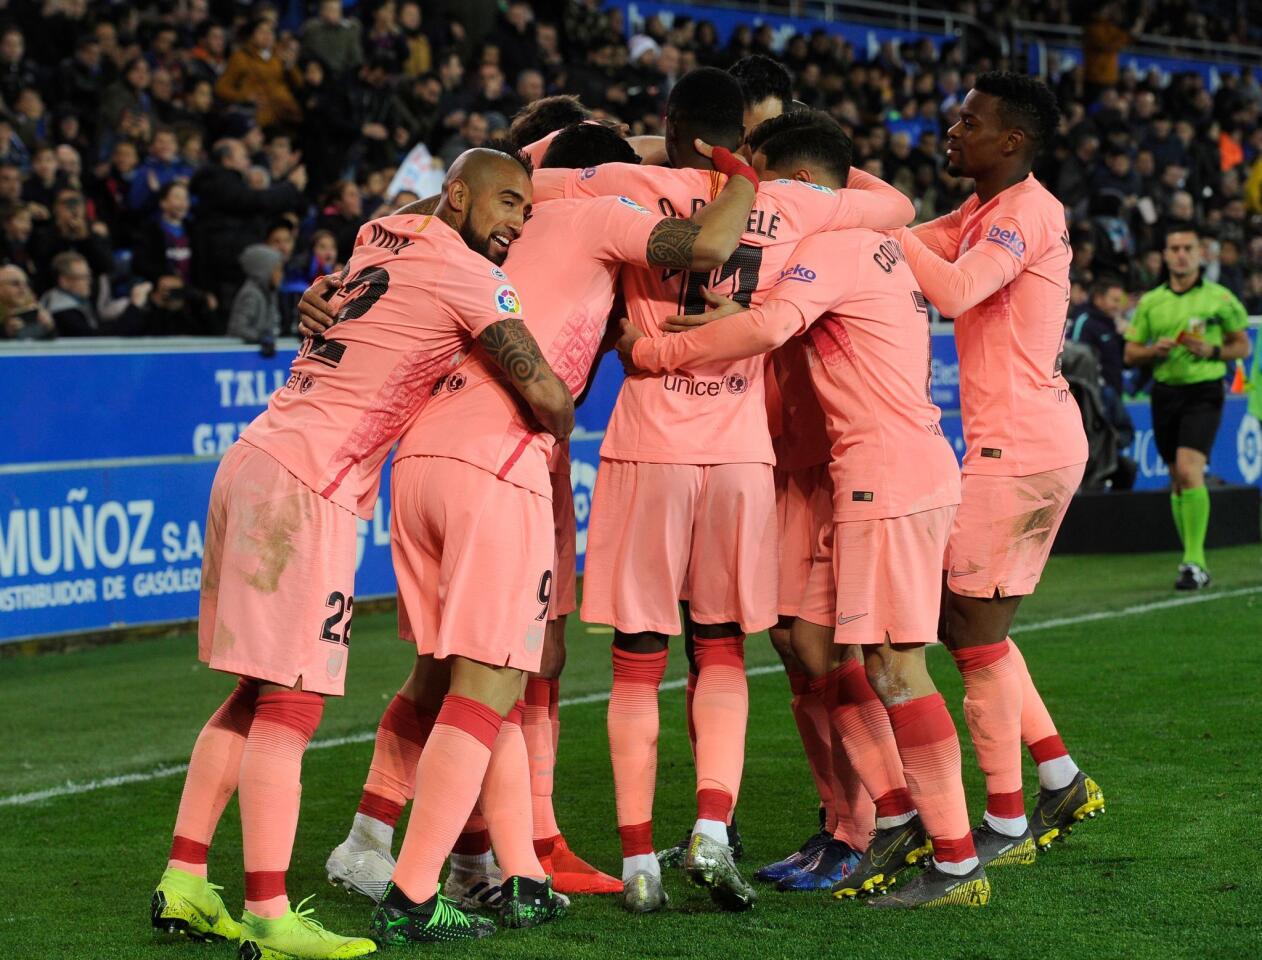 Barcelona's players celebrate their second goal during the Spanish league football match between Deportivo Alaves and FC Barcelona at the Mendizorroza stadium in Vitoria on April 23, 2019. (Photo by ANDER GILLENEA / AFP)ANDER GILLENEA/AFP/Getty Images ** OUTS - ELSENT, FPG, CM - OUTS * NM, PH, VA if sourced by CT, LA or MoD **